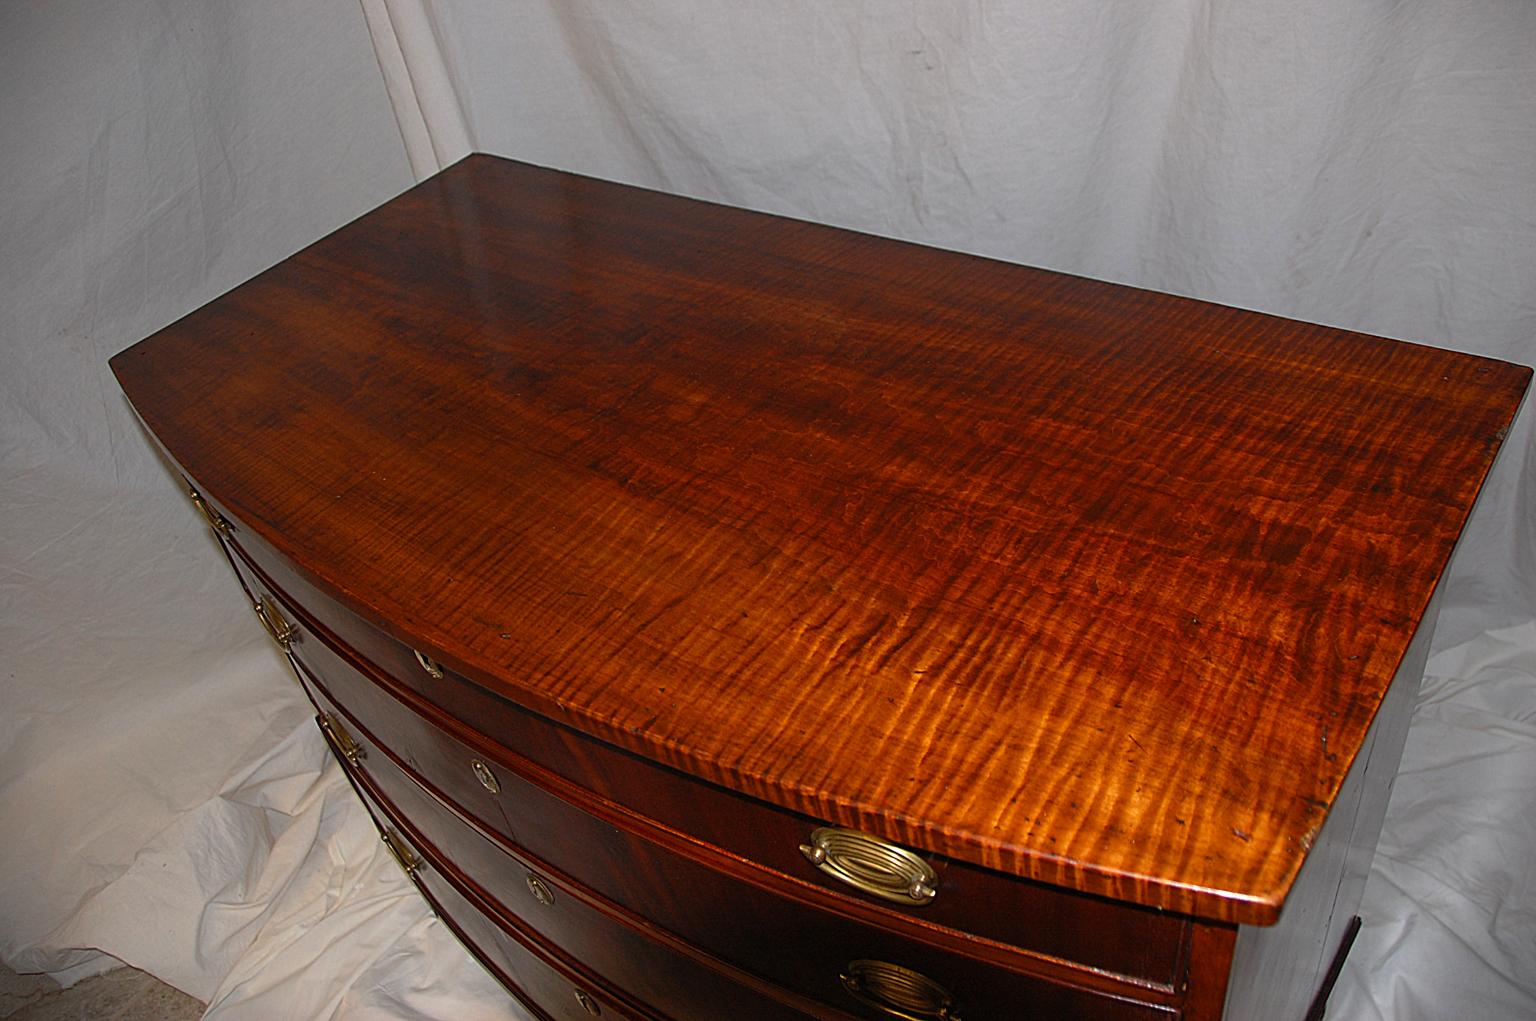 18th Century American Federal Hepplewhite Bowfront Chest of Drawers Tiger Maple and Mahogany